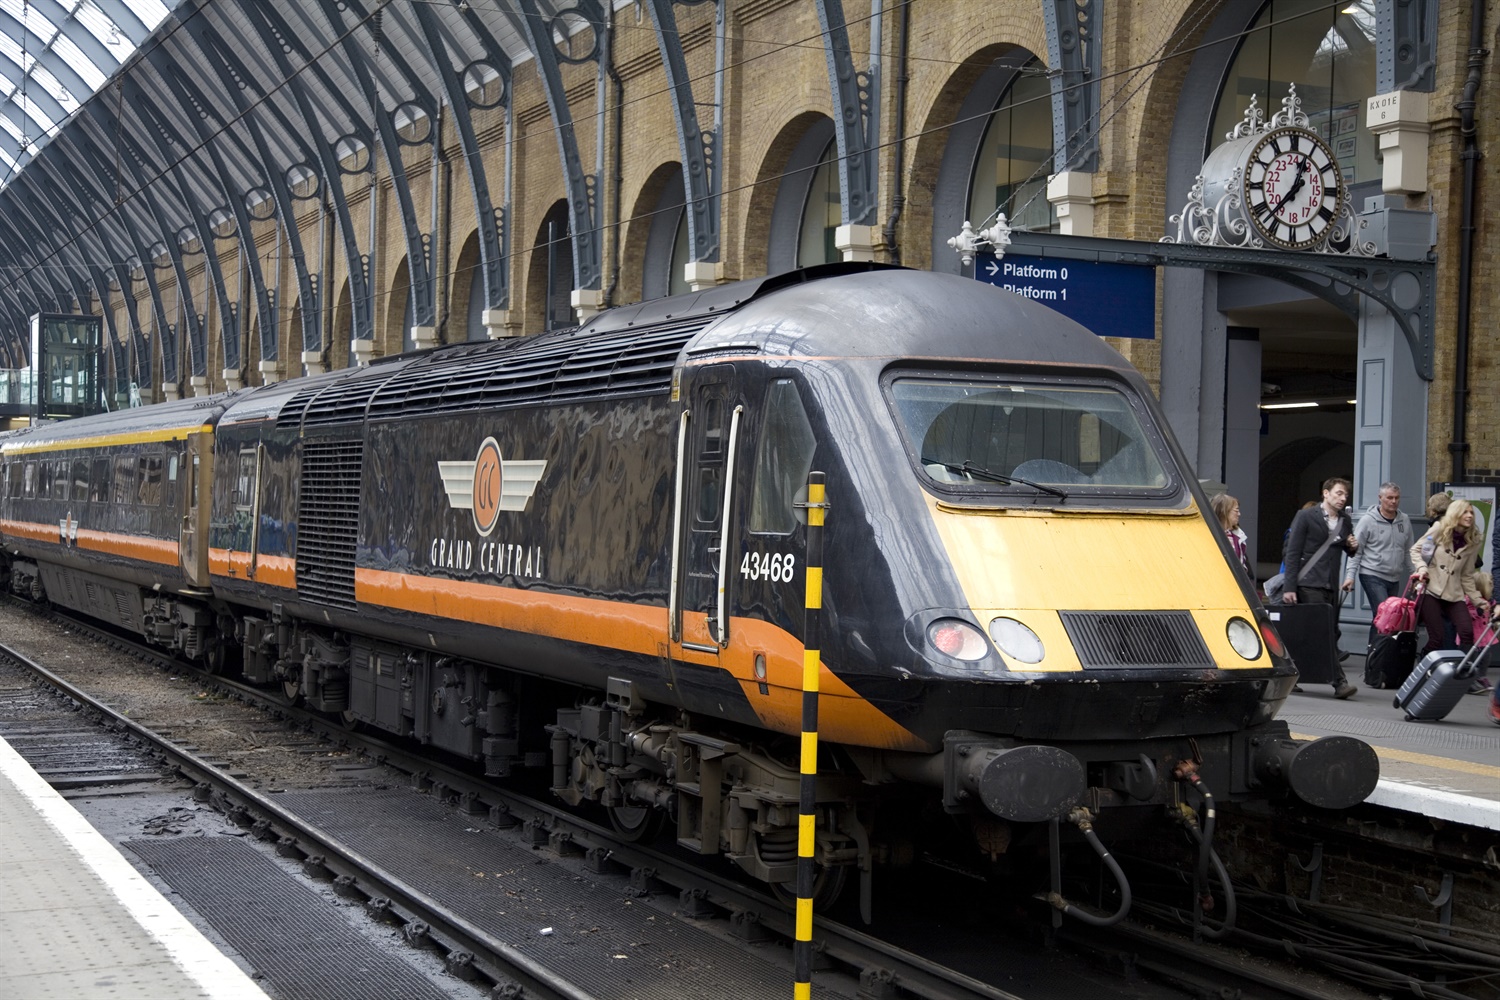 Grand Central completes £9m refurbishment of rolling stock